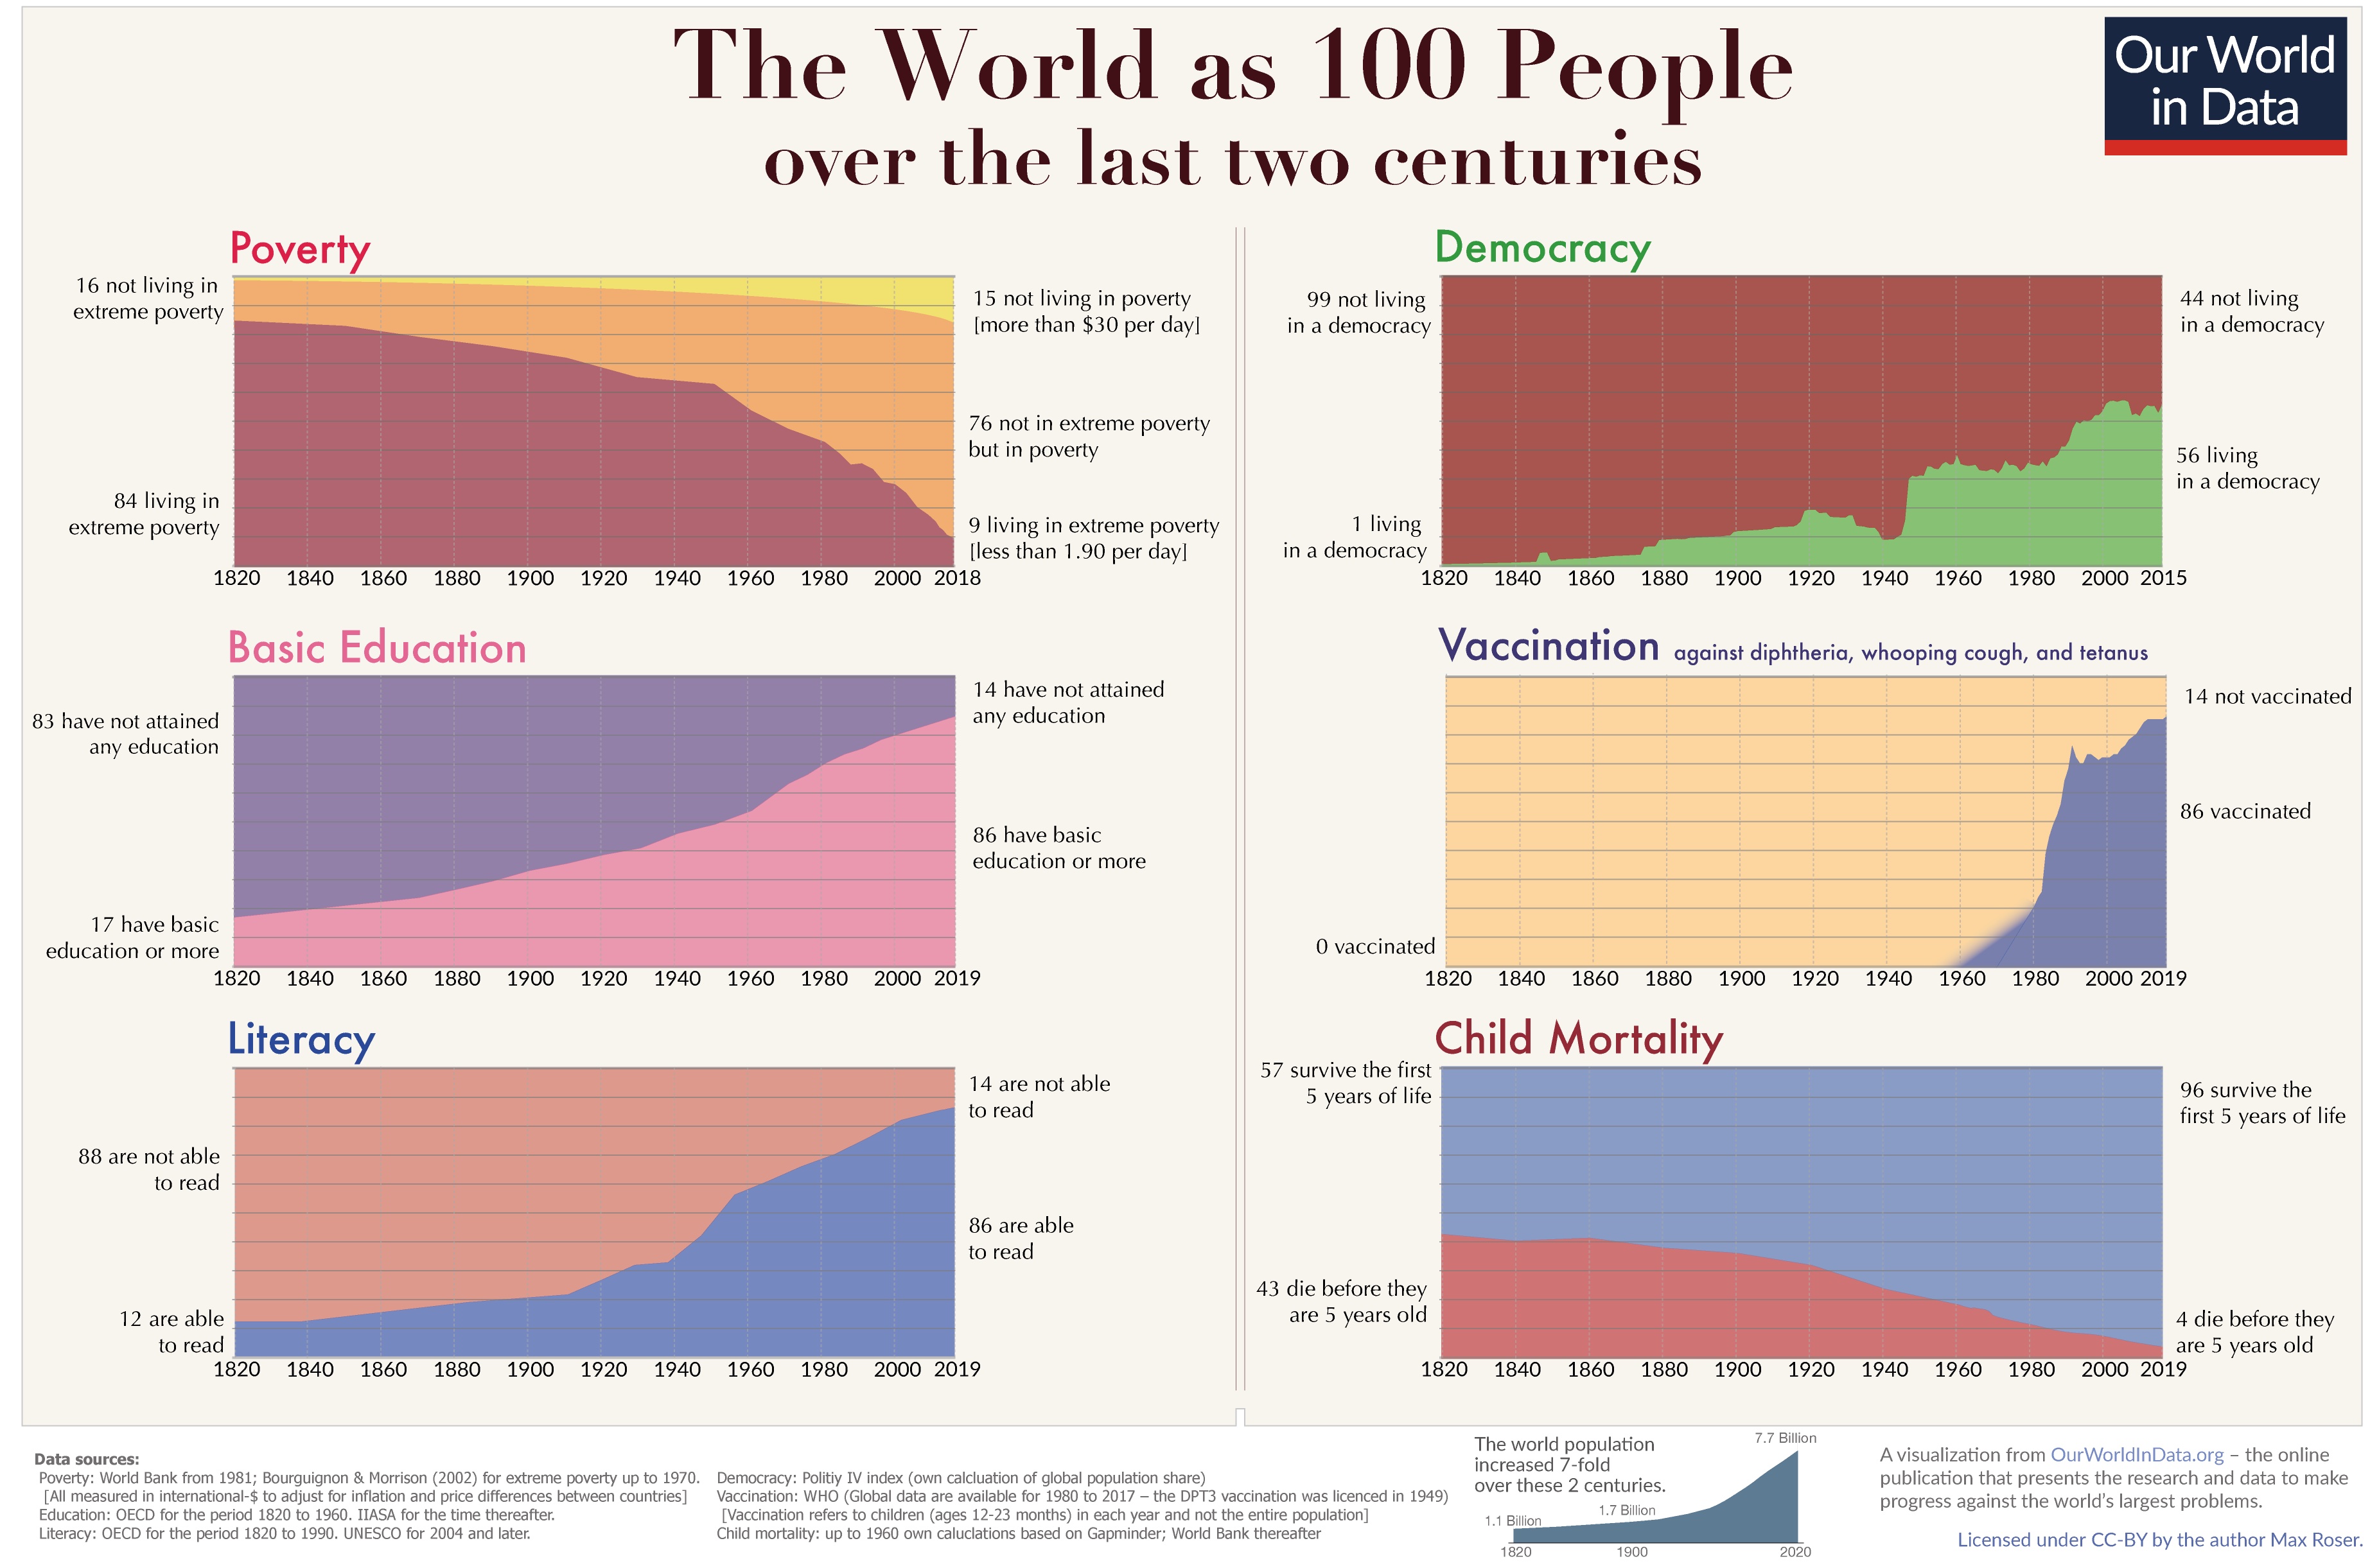 the world as 100 people over the last two centuries.